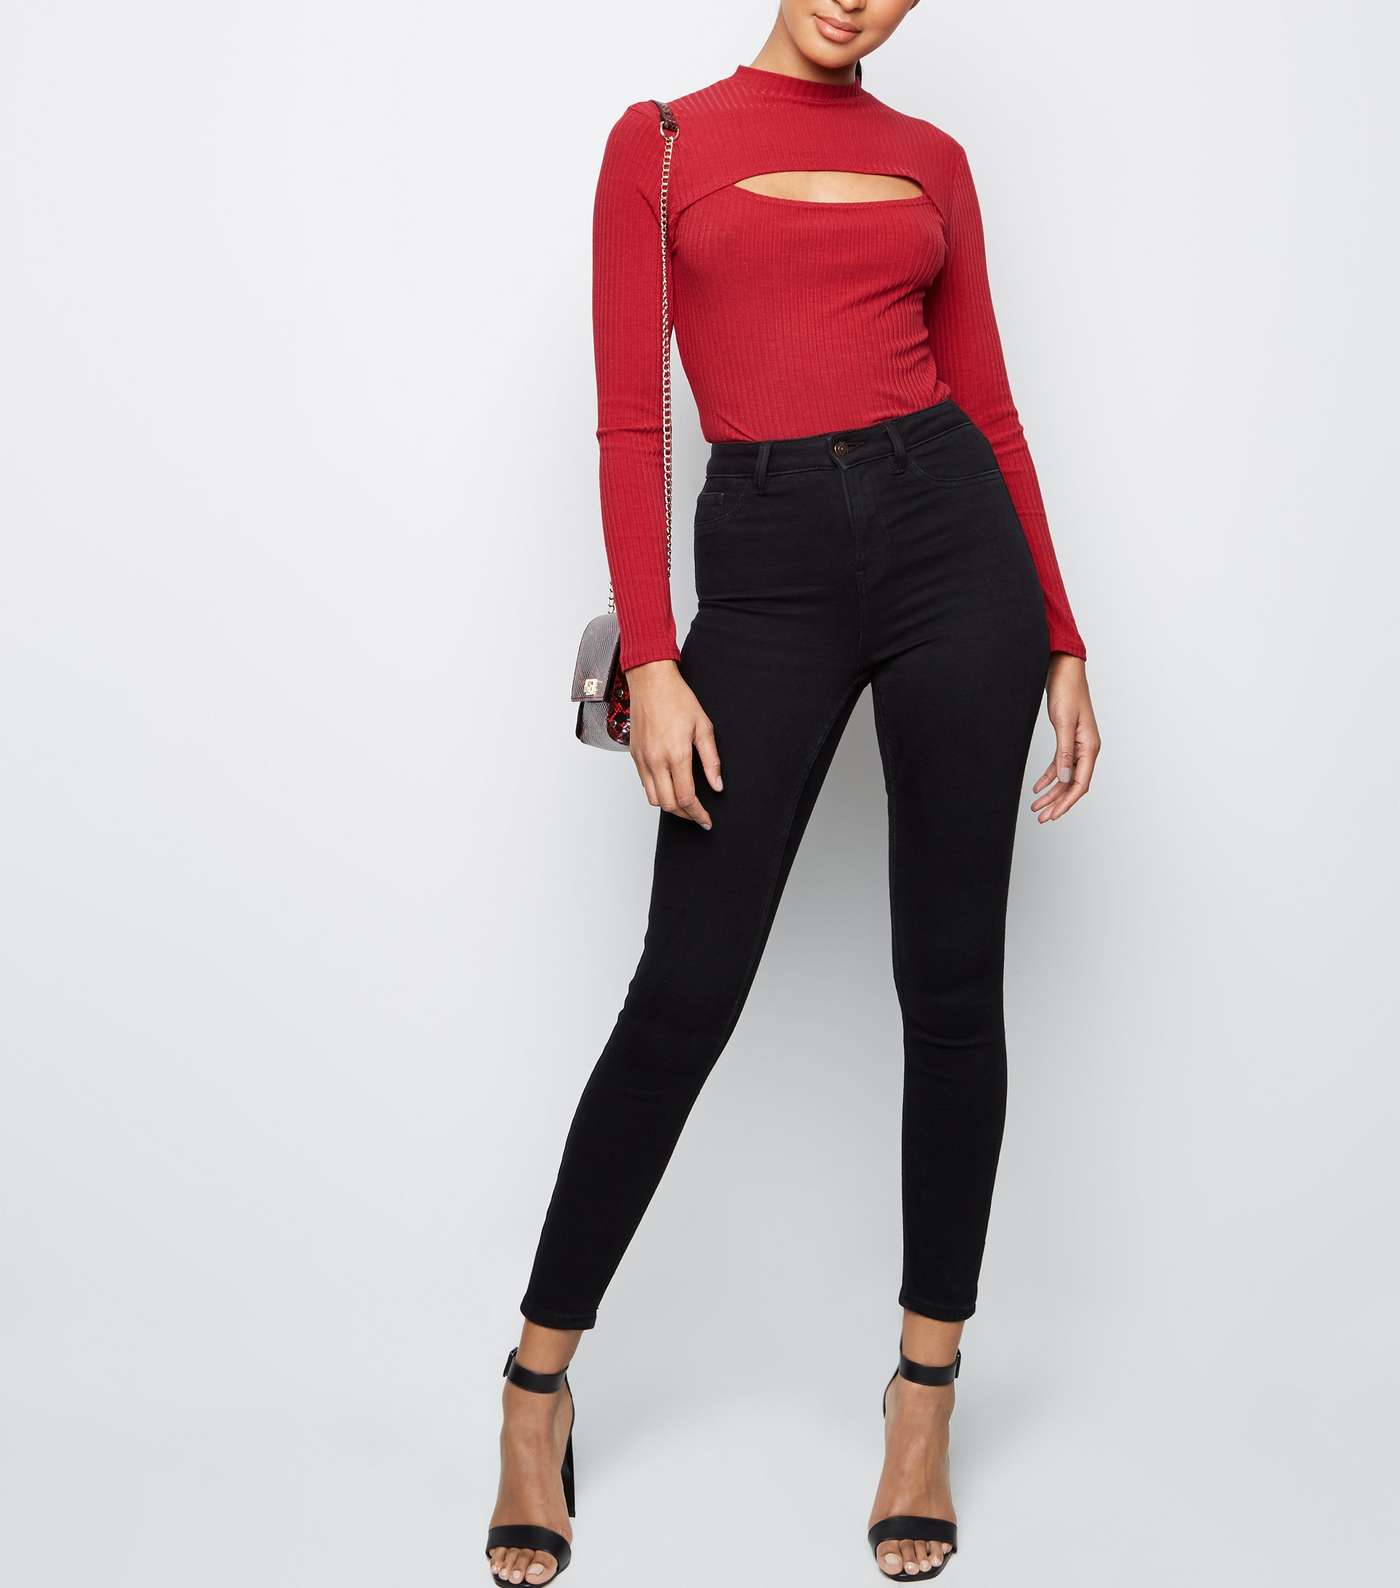 Red Ribbed Cut Out Bodysuit Image 2